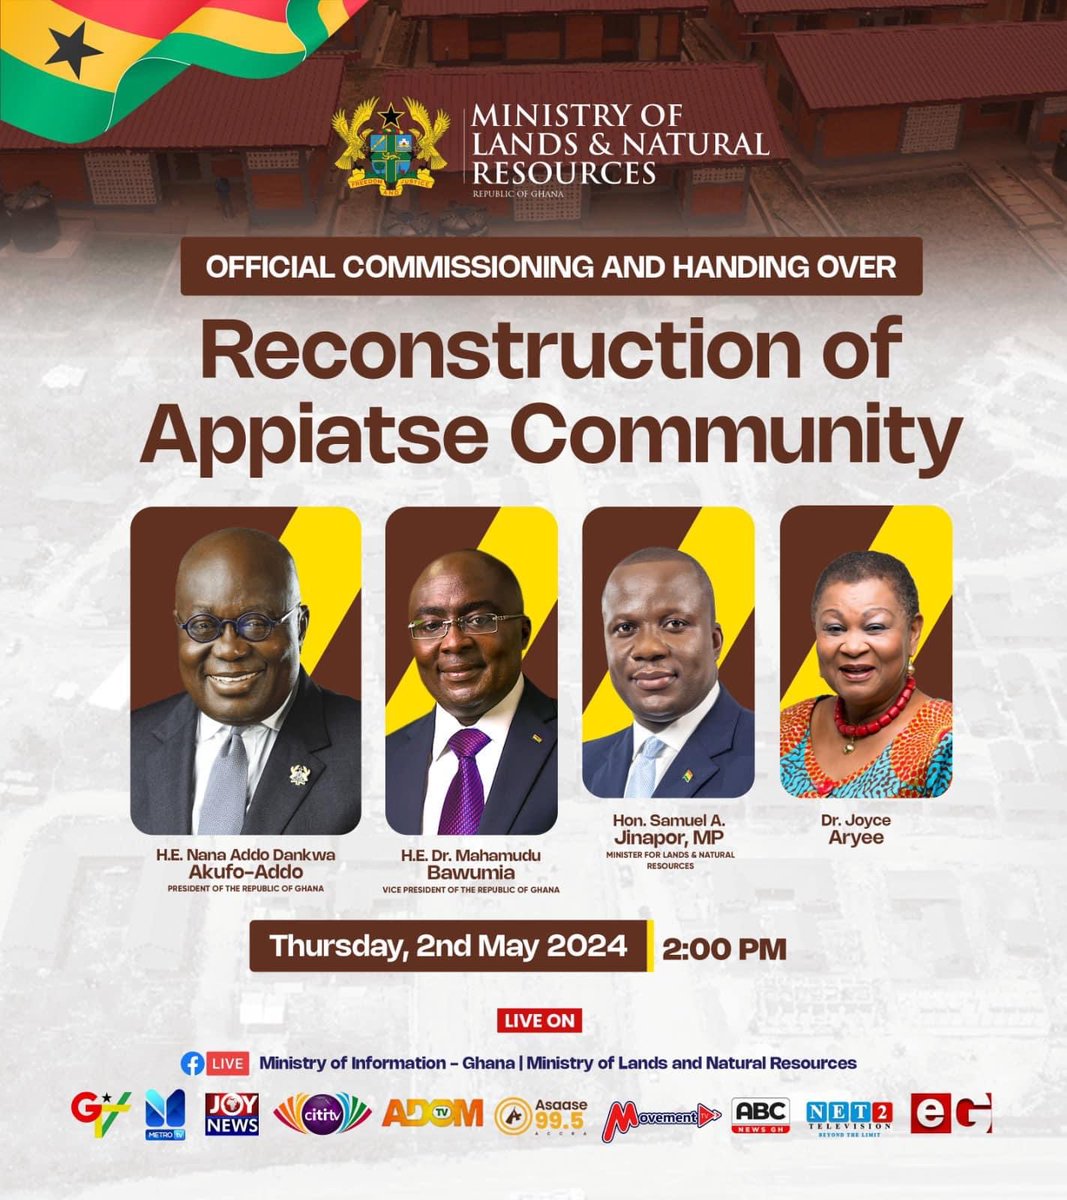 Kindly join us on thursday, 2nd May for the Official Commissioning and Handing Over of the Reconstruction of Appiatse Community. #AppiatseReconstruction #BuildingGhanaTogether